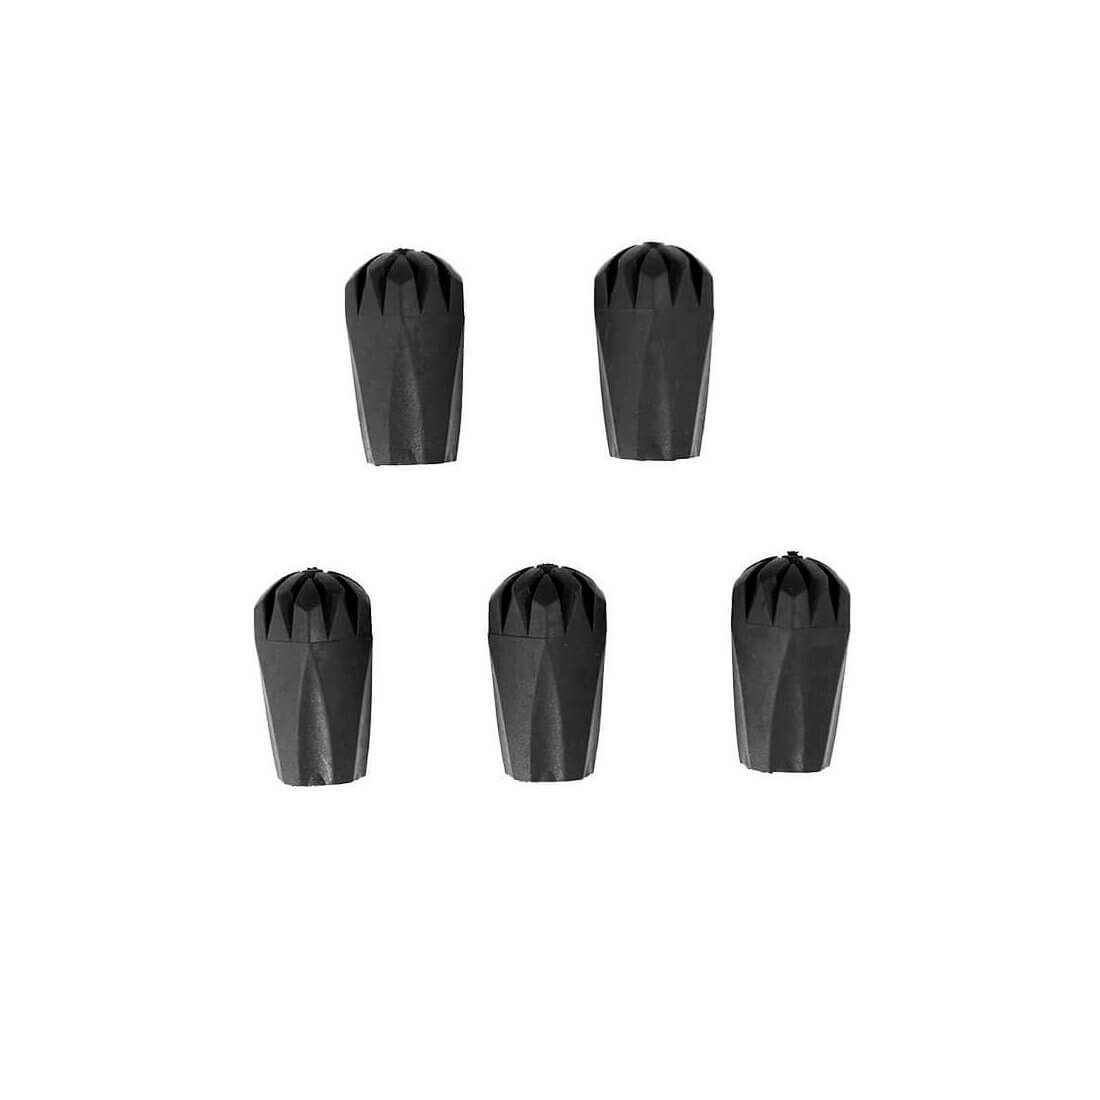 Outdoor Hiking Safety Set: Hiking Pole Tip, Walking Sticks, Rod Tips, And  Round Foot Cover For Durable Rubber Wear From Nicespring, $13.86